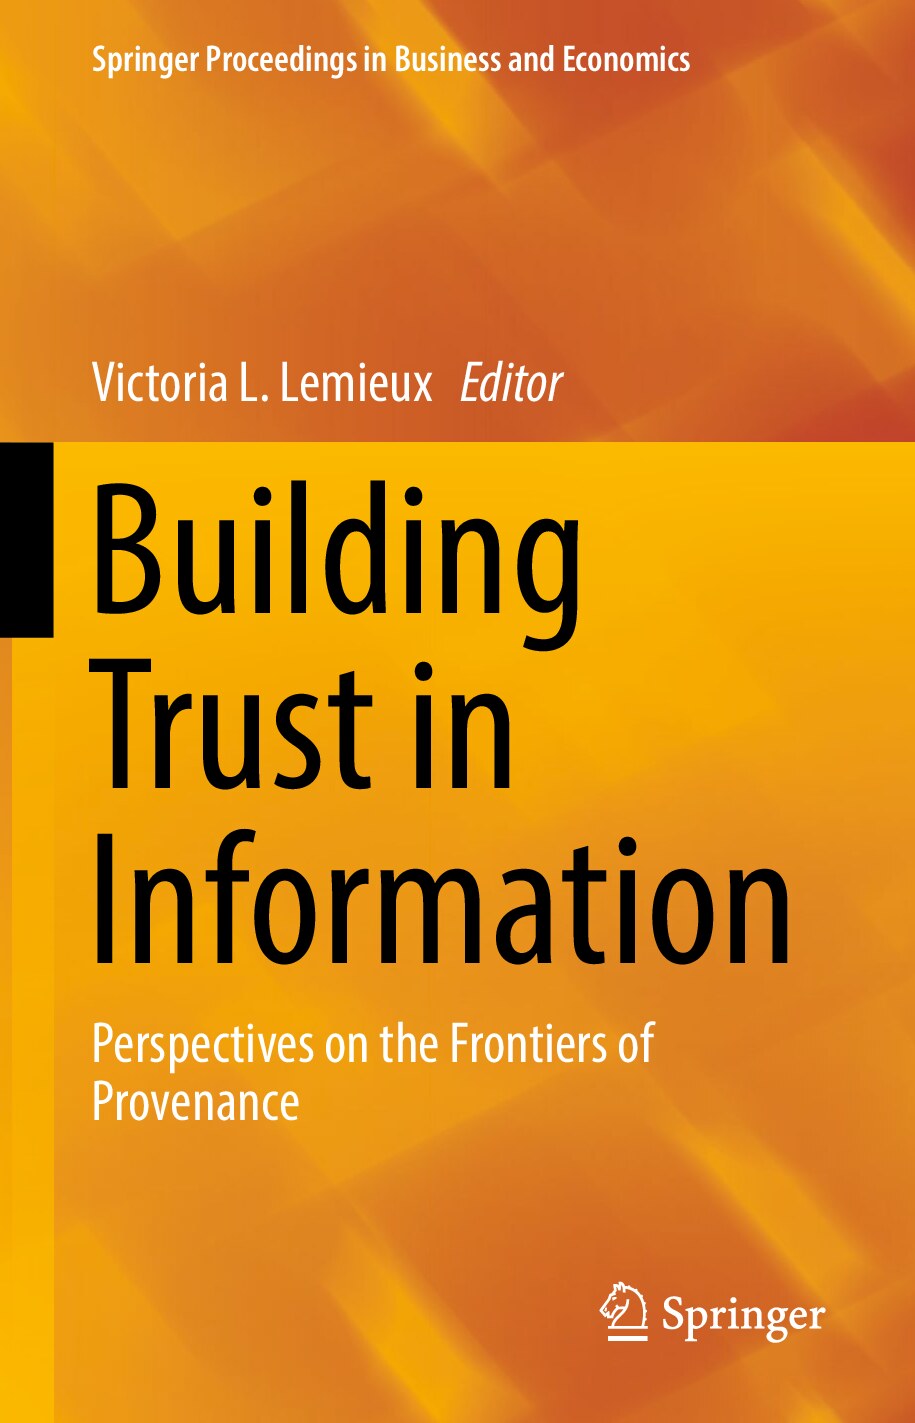 Building Trust in Information_ Perspectives on the Frontiers of Provenance, (2016)